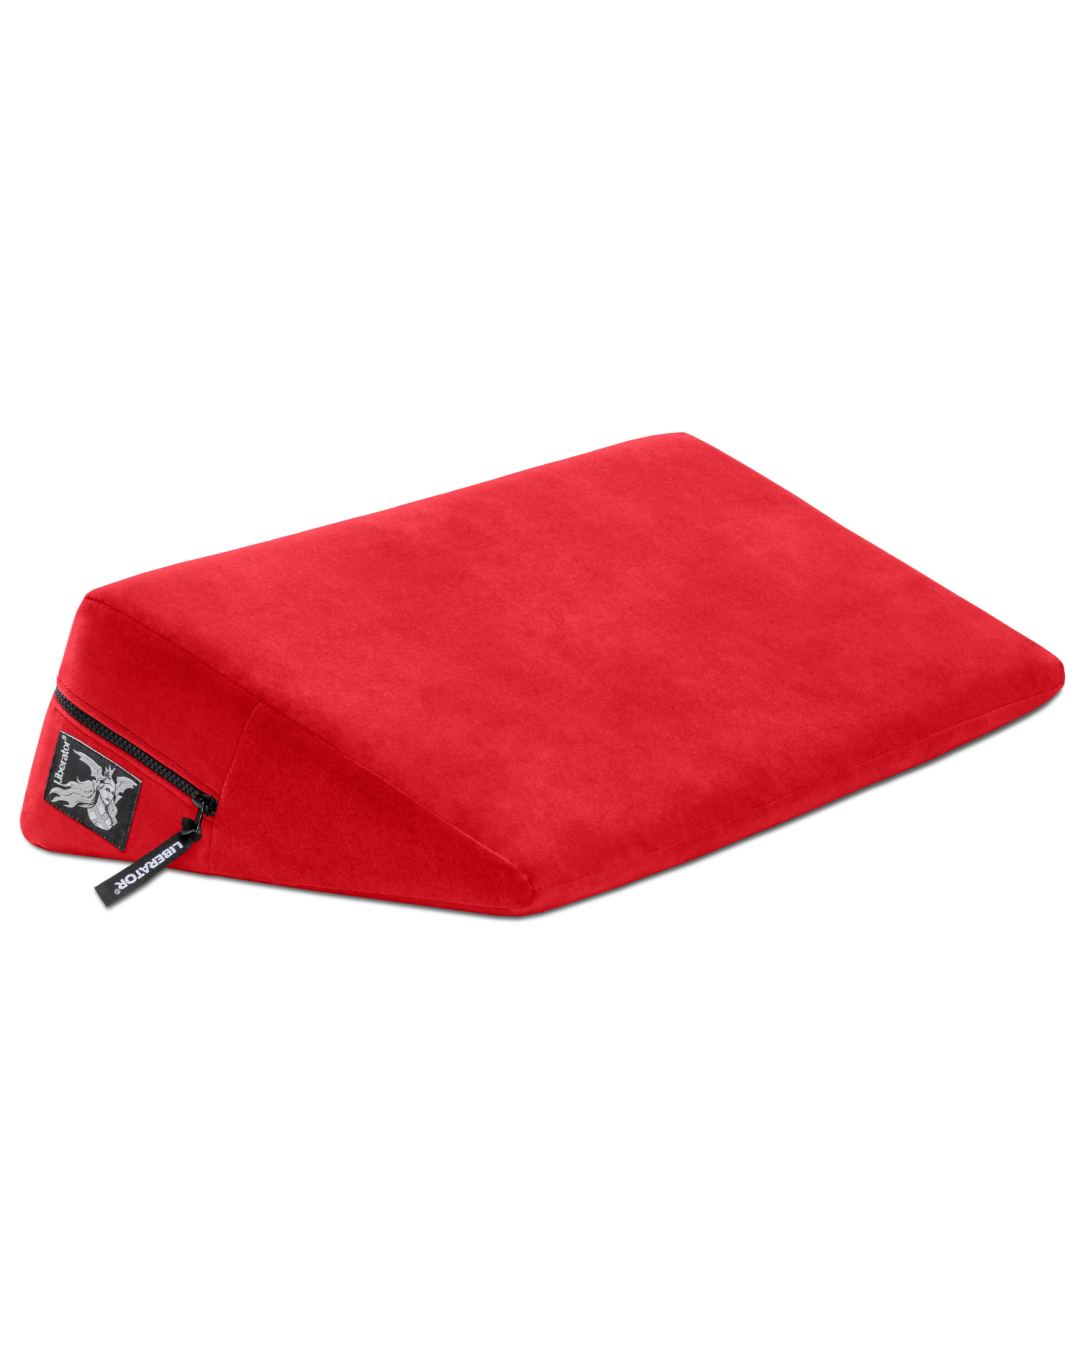 Liberator Wedge 24 Inch Sex Positioning Cushion - Red